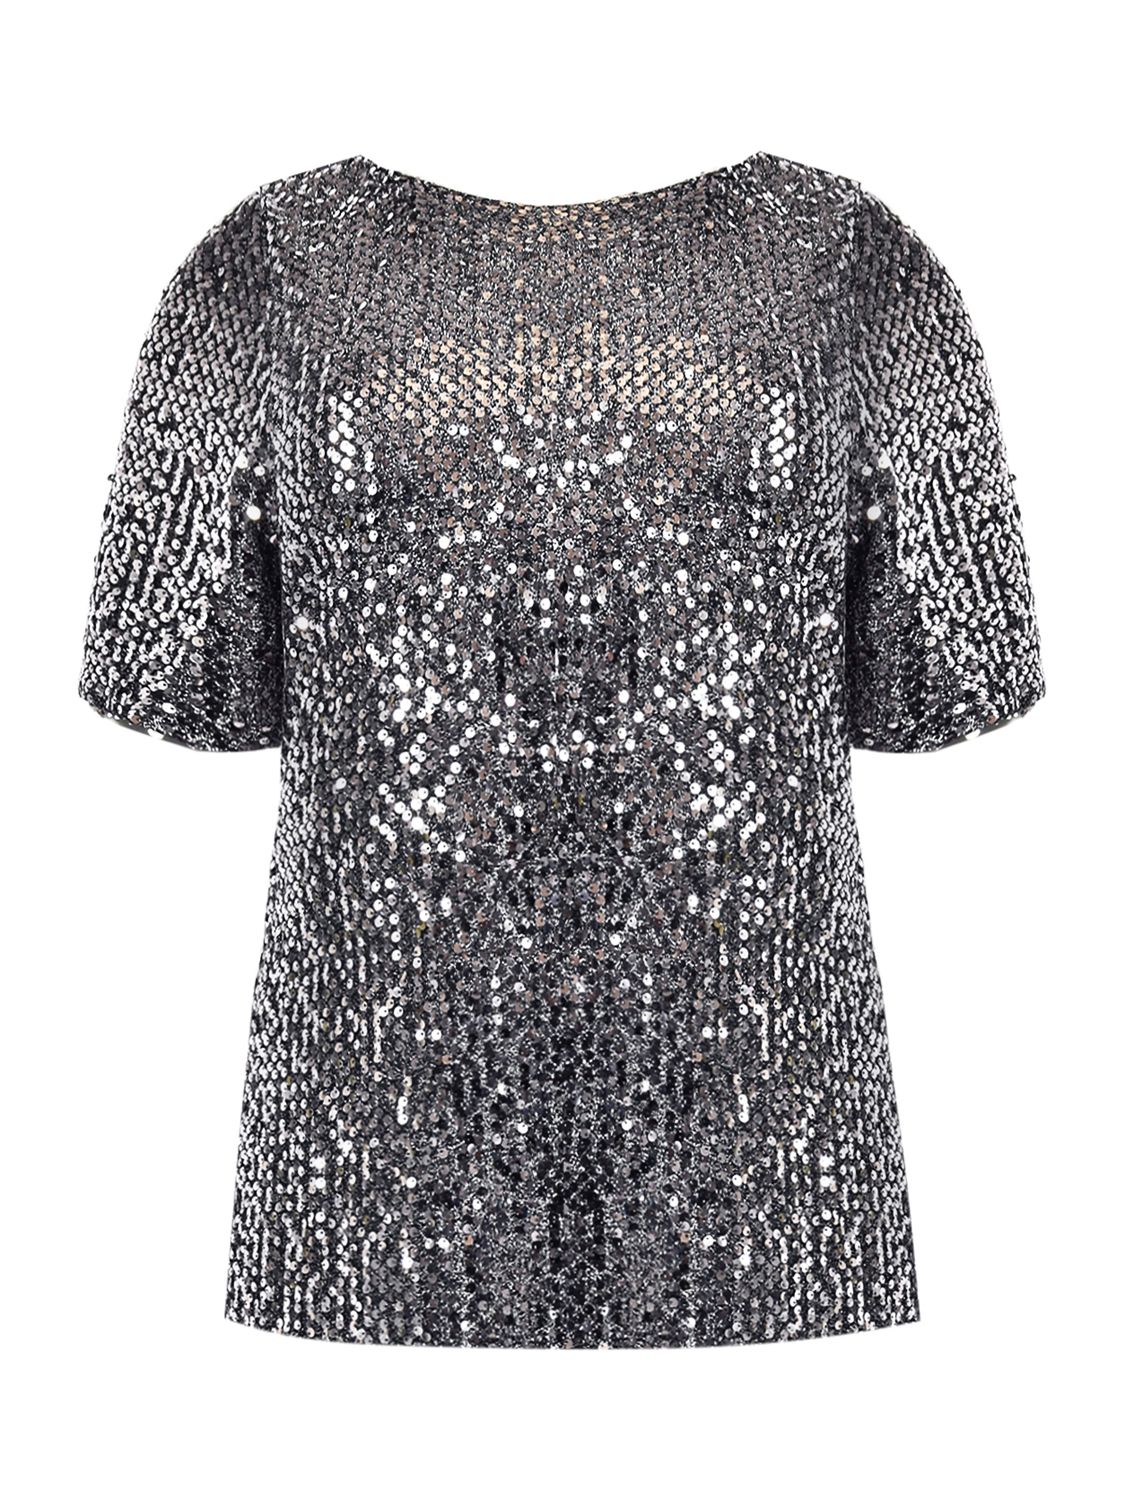 Live Unlimited Curve Sequin Short Sleeve Top, Grey at John Lewis & Partners